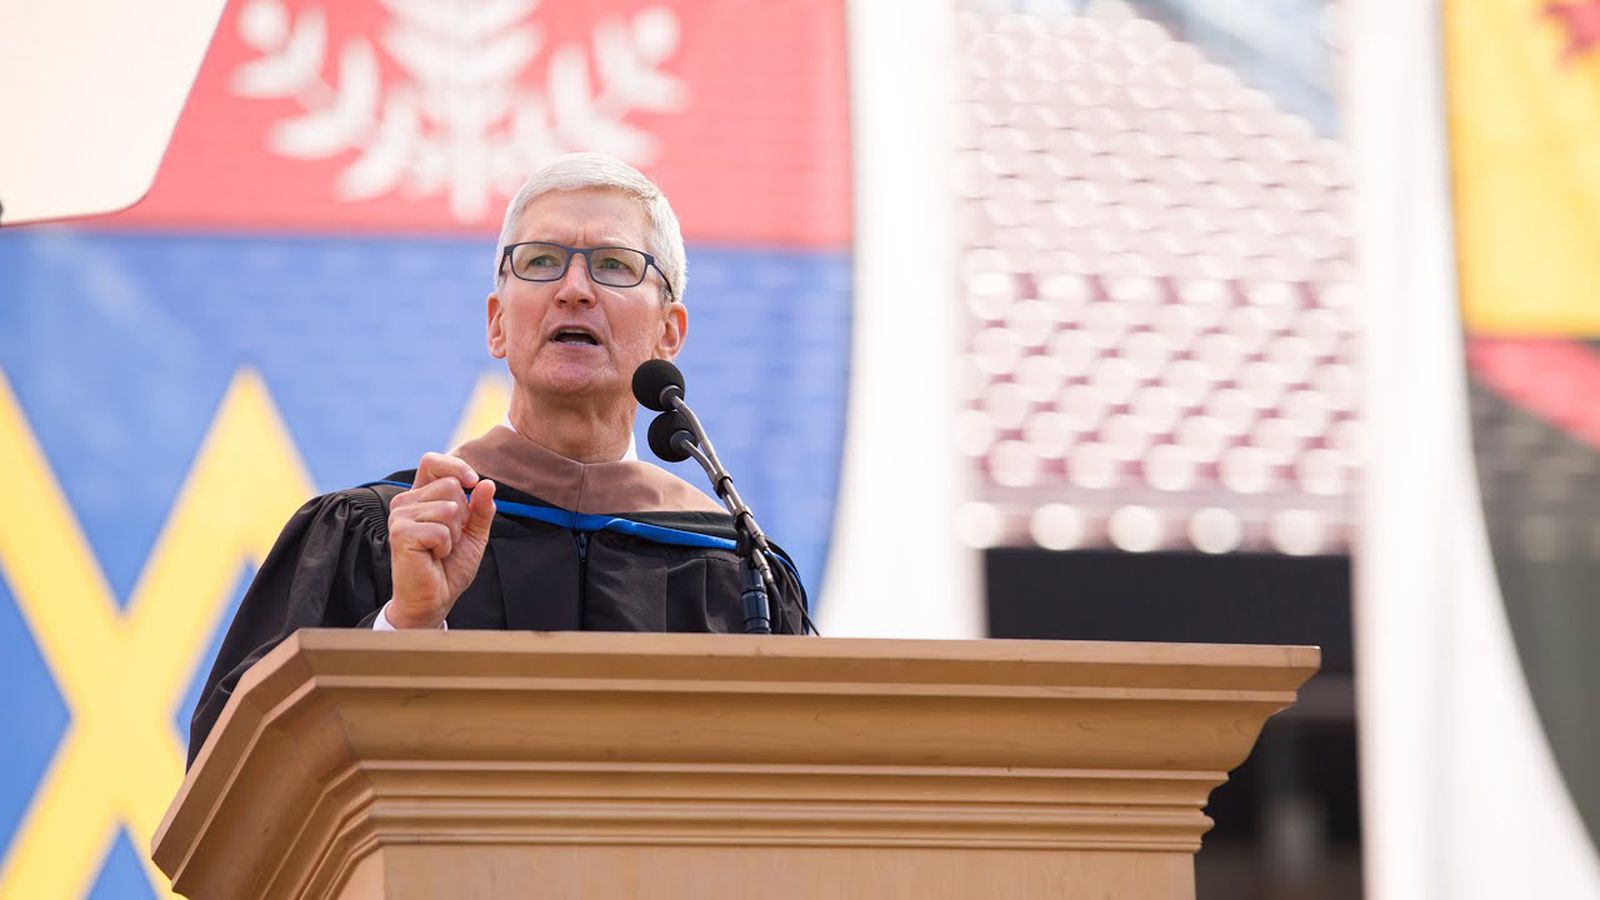 Apple CEO Tim Cook to Deliver Commencement Address at Gallaudet University - macrumors.com